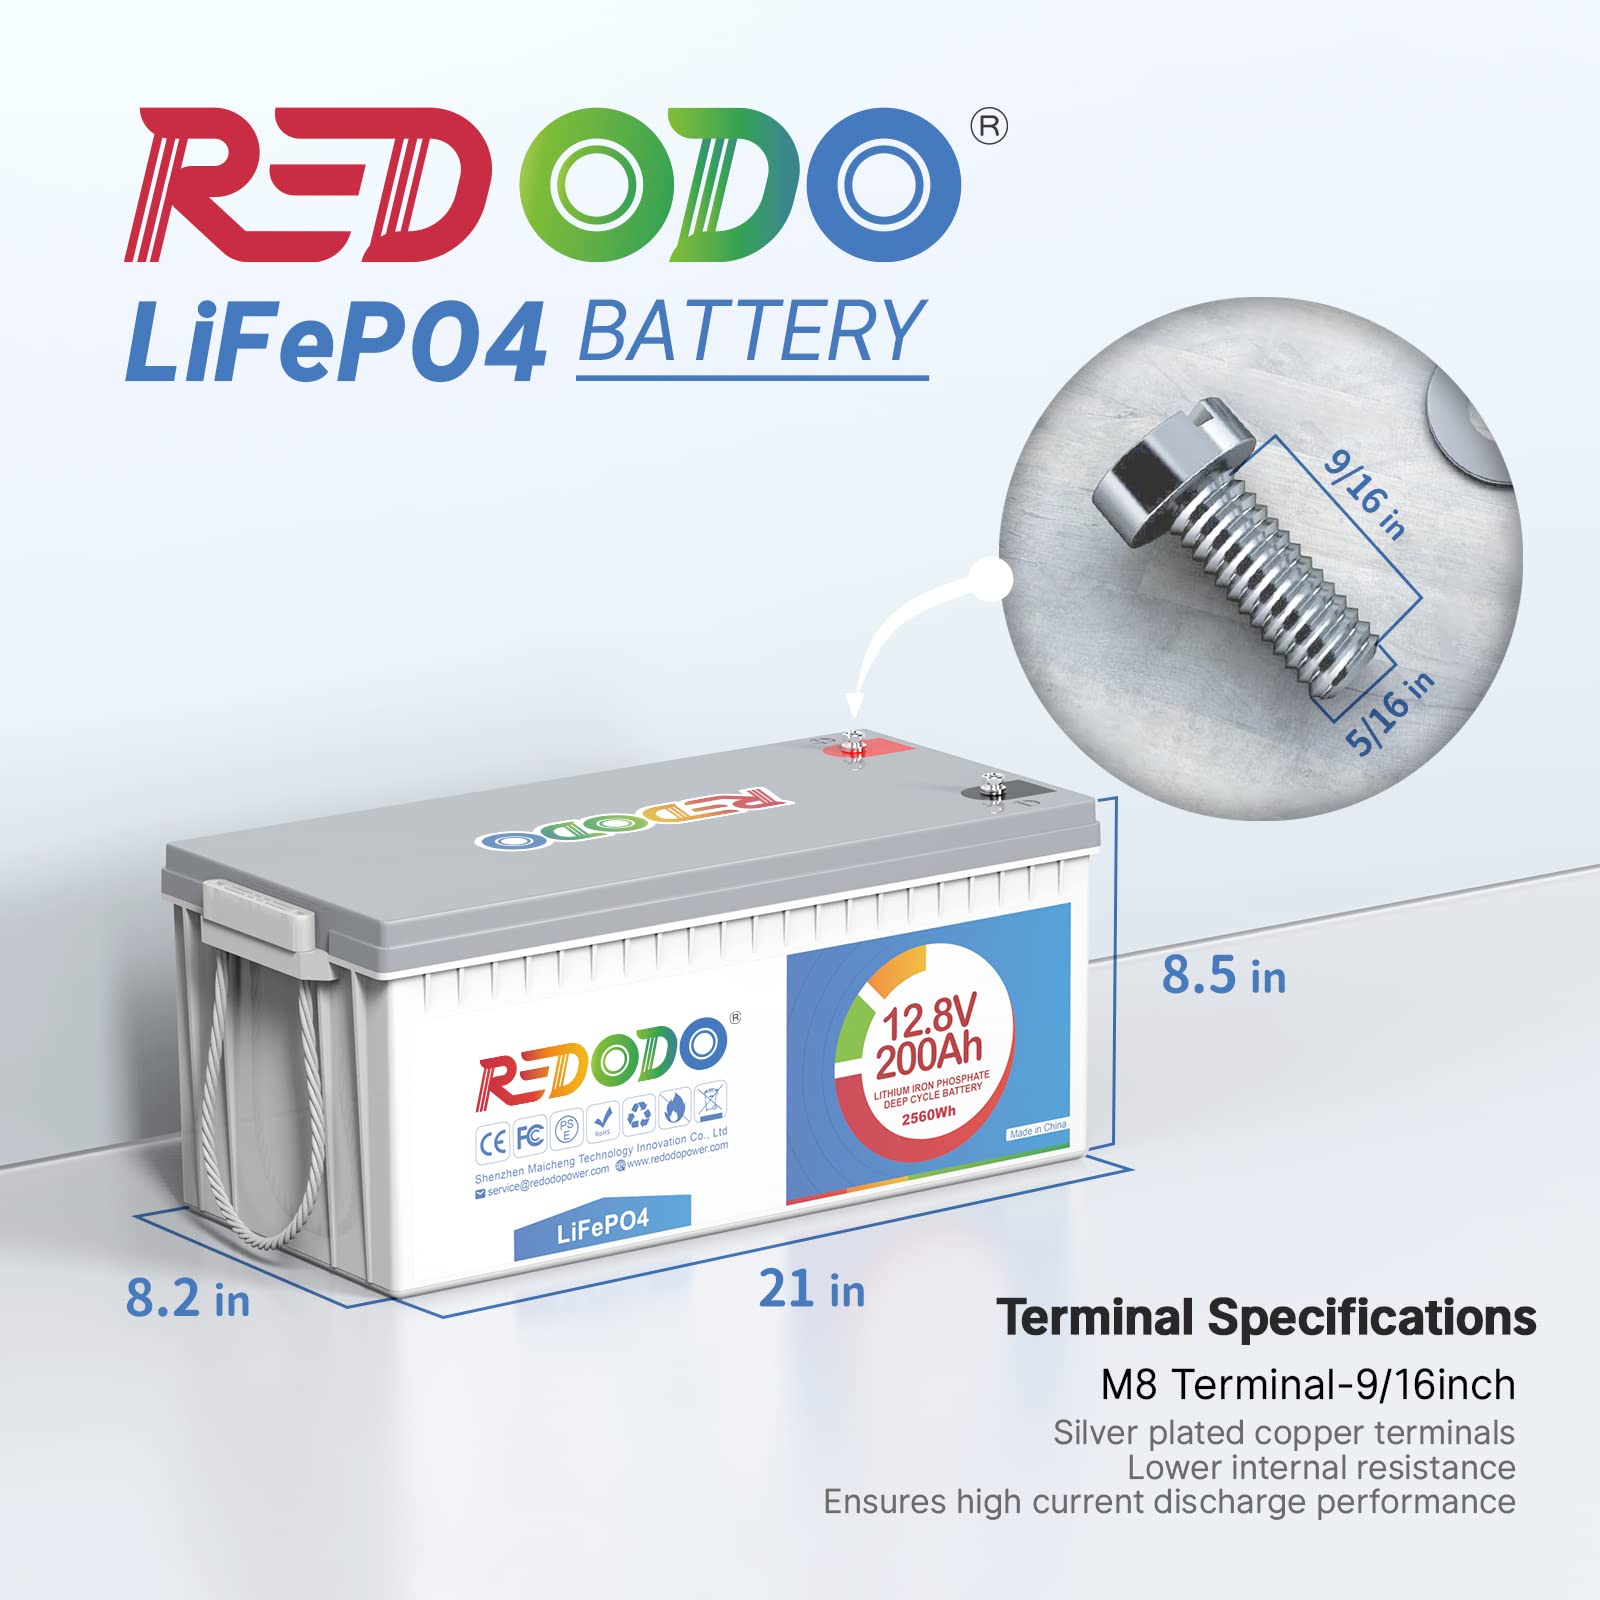 Redodo 12V 200Ah LiFePO4 Battery Lithium Battery with 100A BMS, Rechargeable 4000-15000 Deep Cycles & 10-Year Lifetime, Perfect for RV, Camping, Boats, Trolling Motor, Solar Home System, etc.